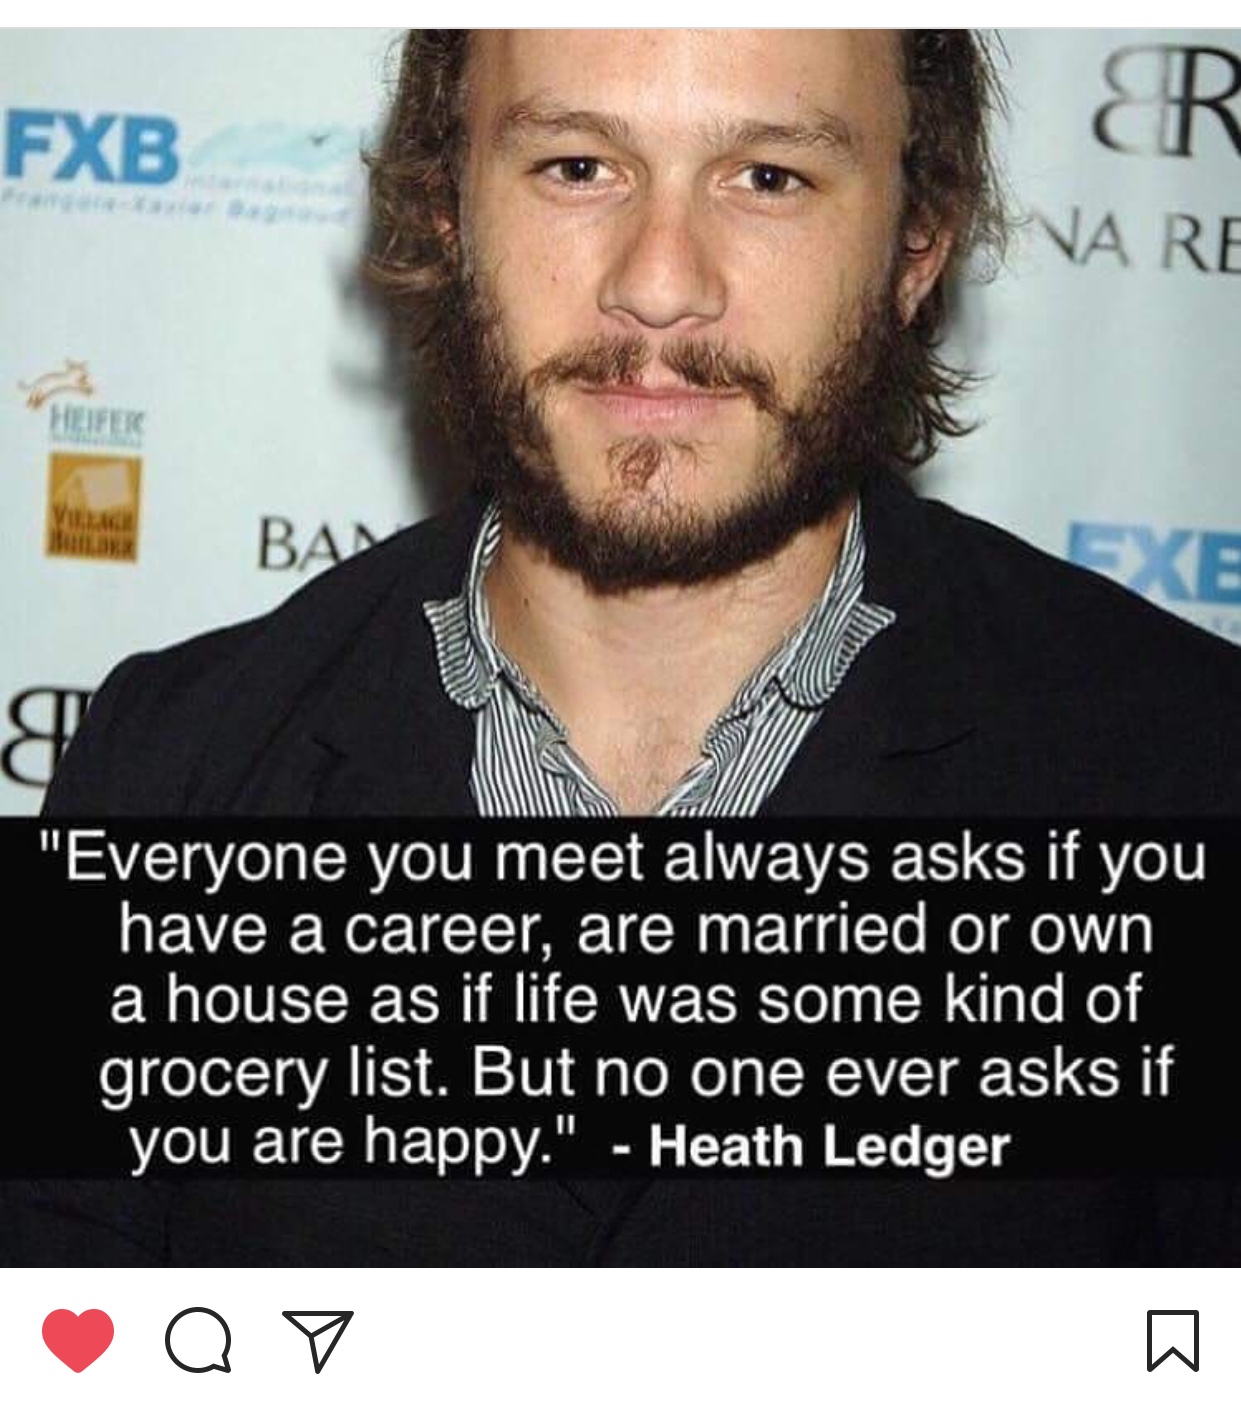 Wiser words have never been spoken by the late great Heath Ledger who playe...